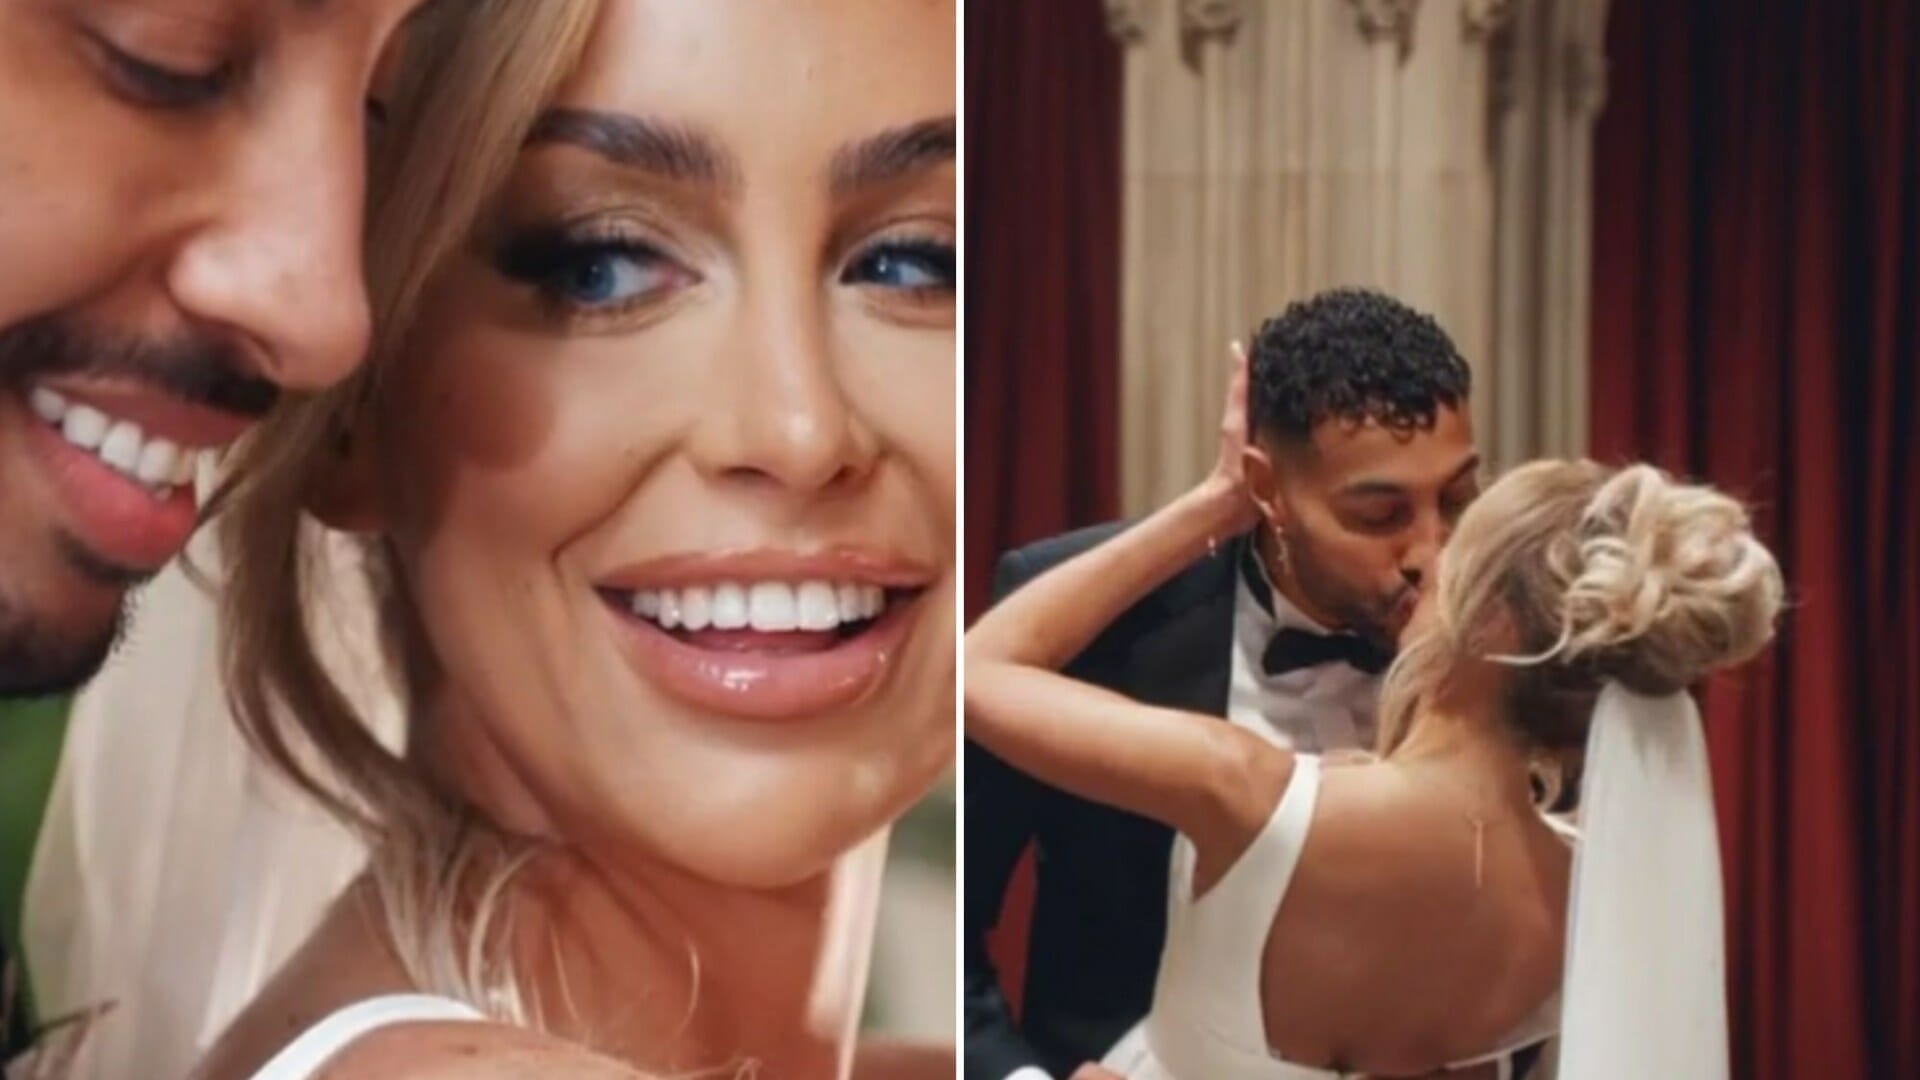 MAFS UK viewers in tears as show's first transgender bride Ella marries Geordie Shore star & they share passionate kiss